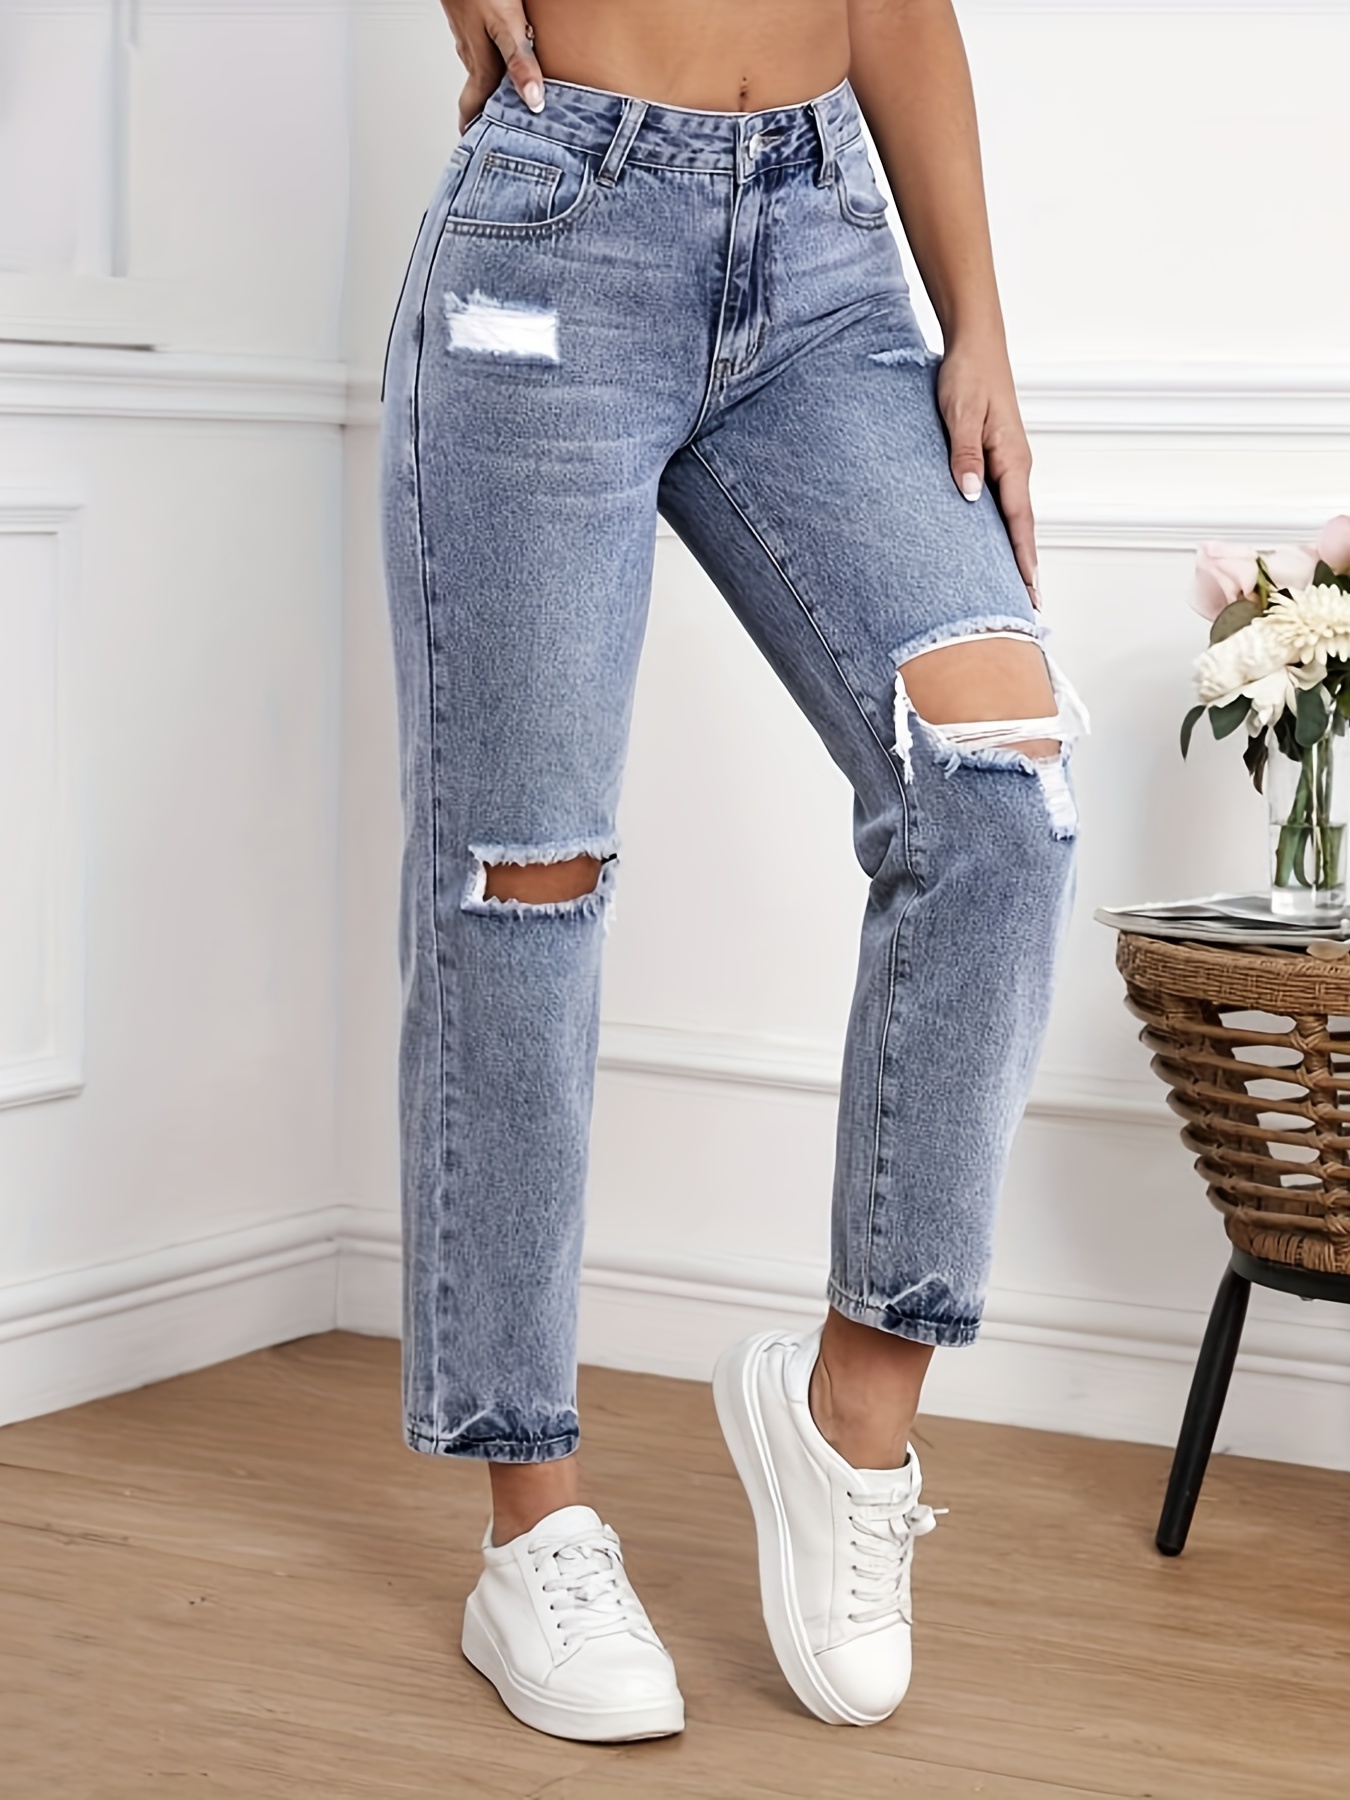 Jeans Wjustforu Sexy Hollow Out Ripped Jeans For Women Personality